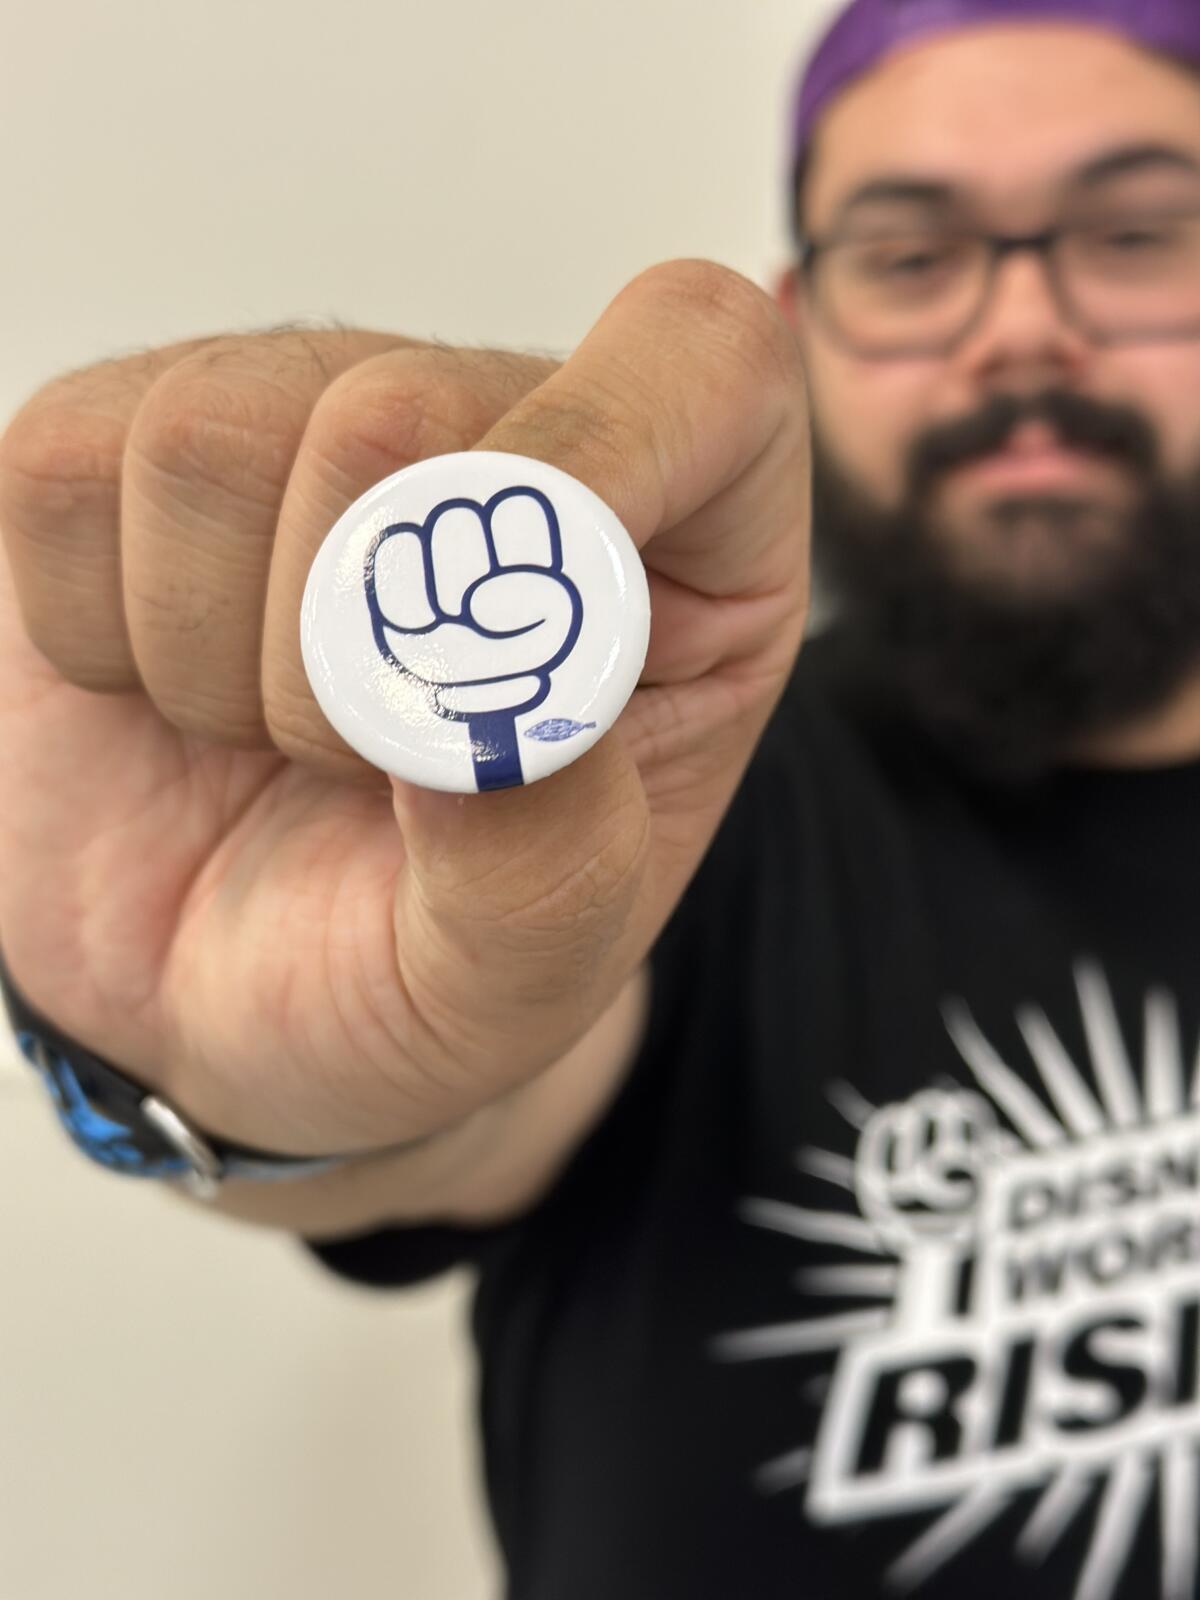 Daniel Rodriguez, a Disneyland custodian, holds the union button that got him a warning at work.